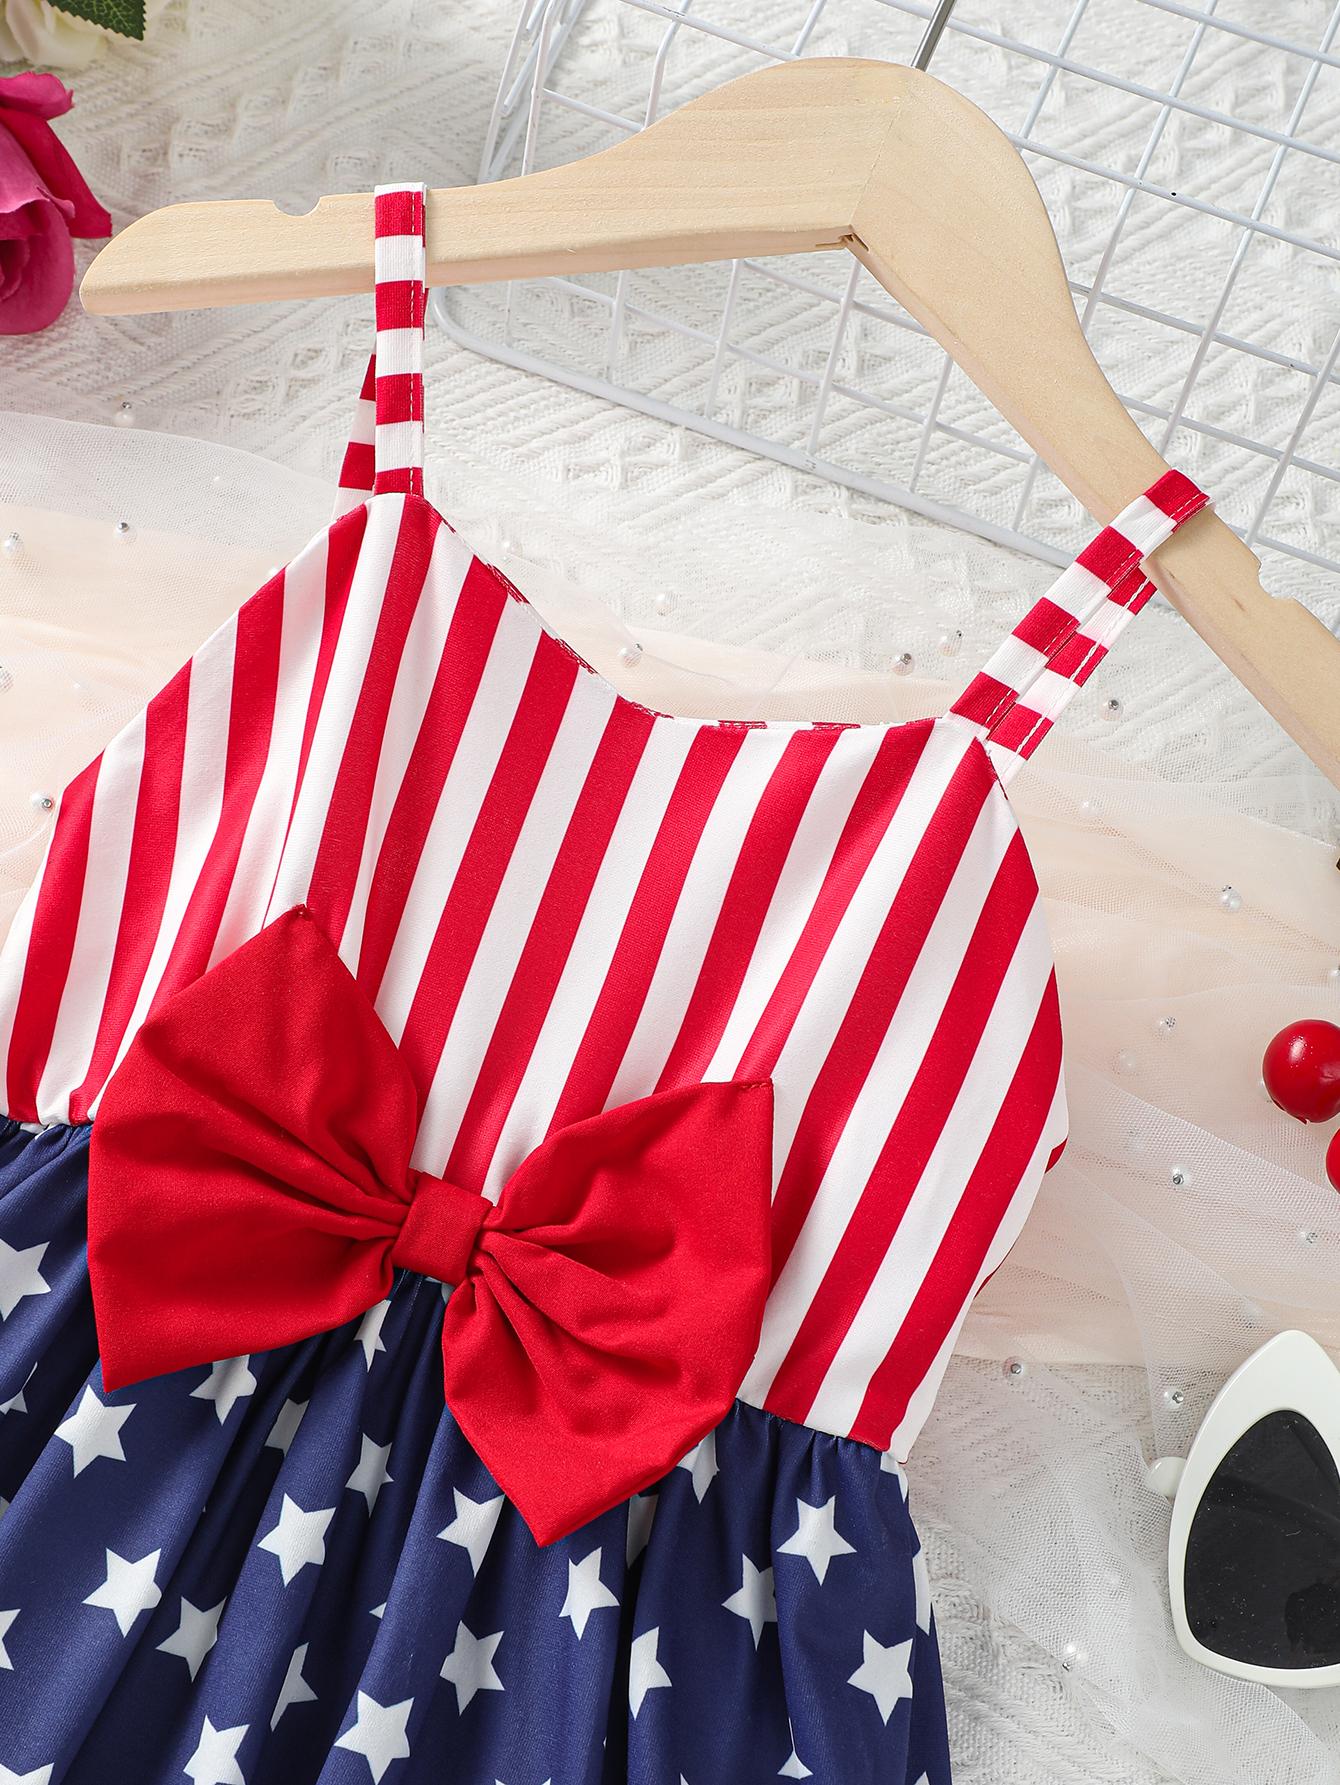 2-7Y Ready Stock Baby Girls Dress Stars and Stripes Bow Straps Dress One Piece Dress For Independence Day Catpapa  623030001